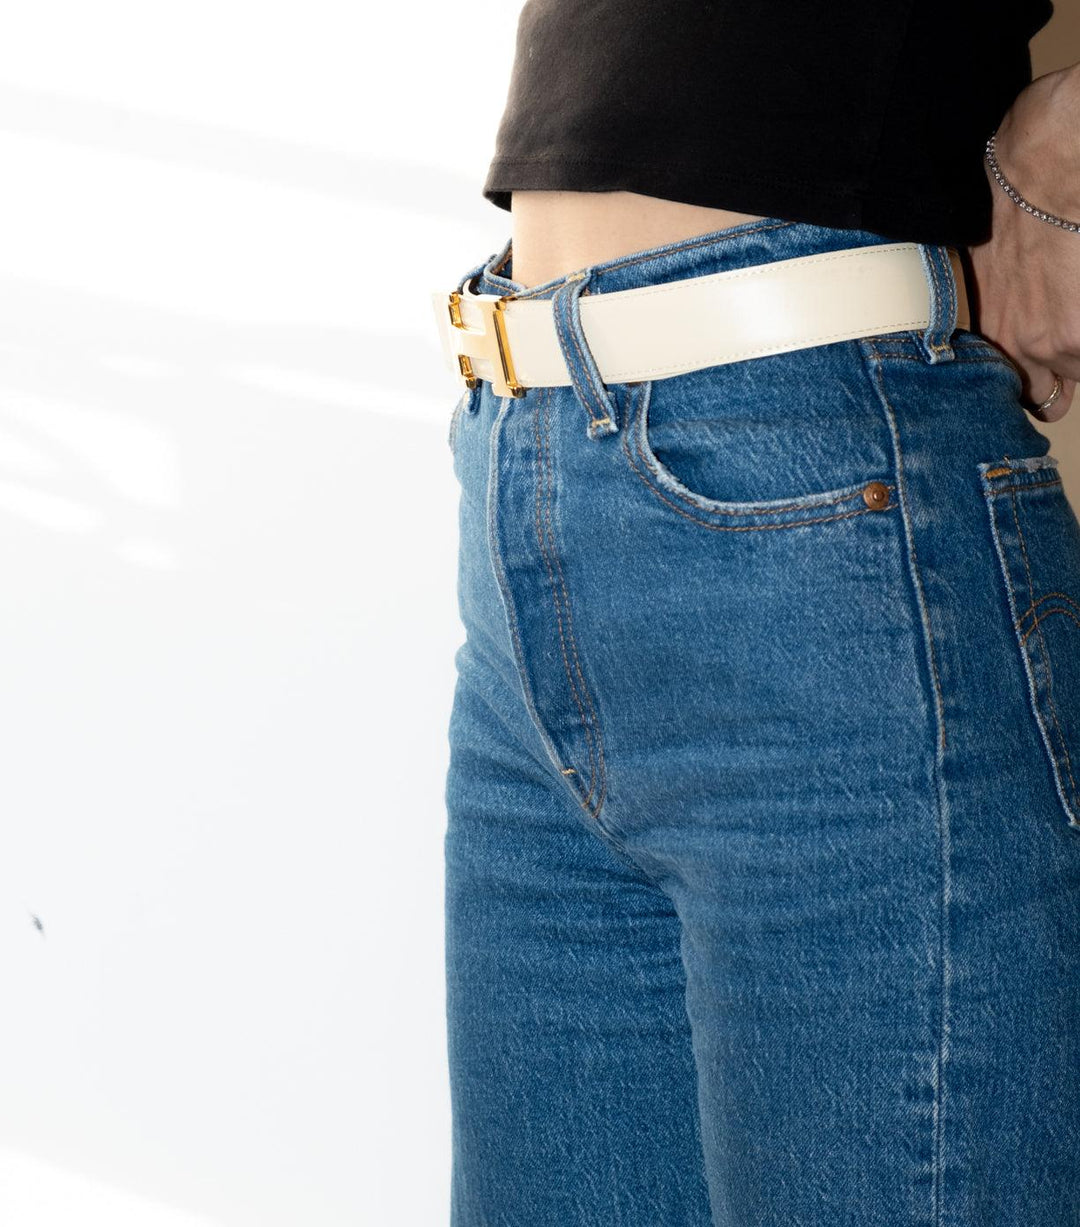 double Sided Leather Belt Gold - Volver